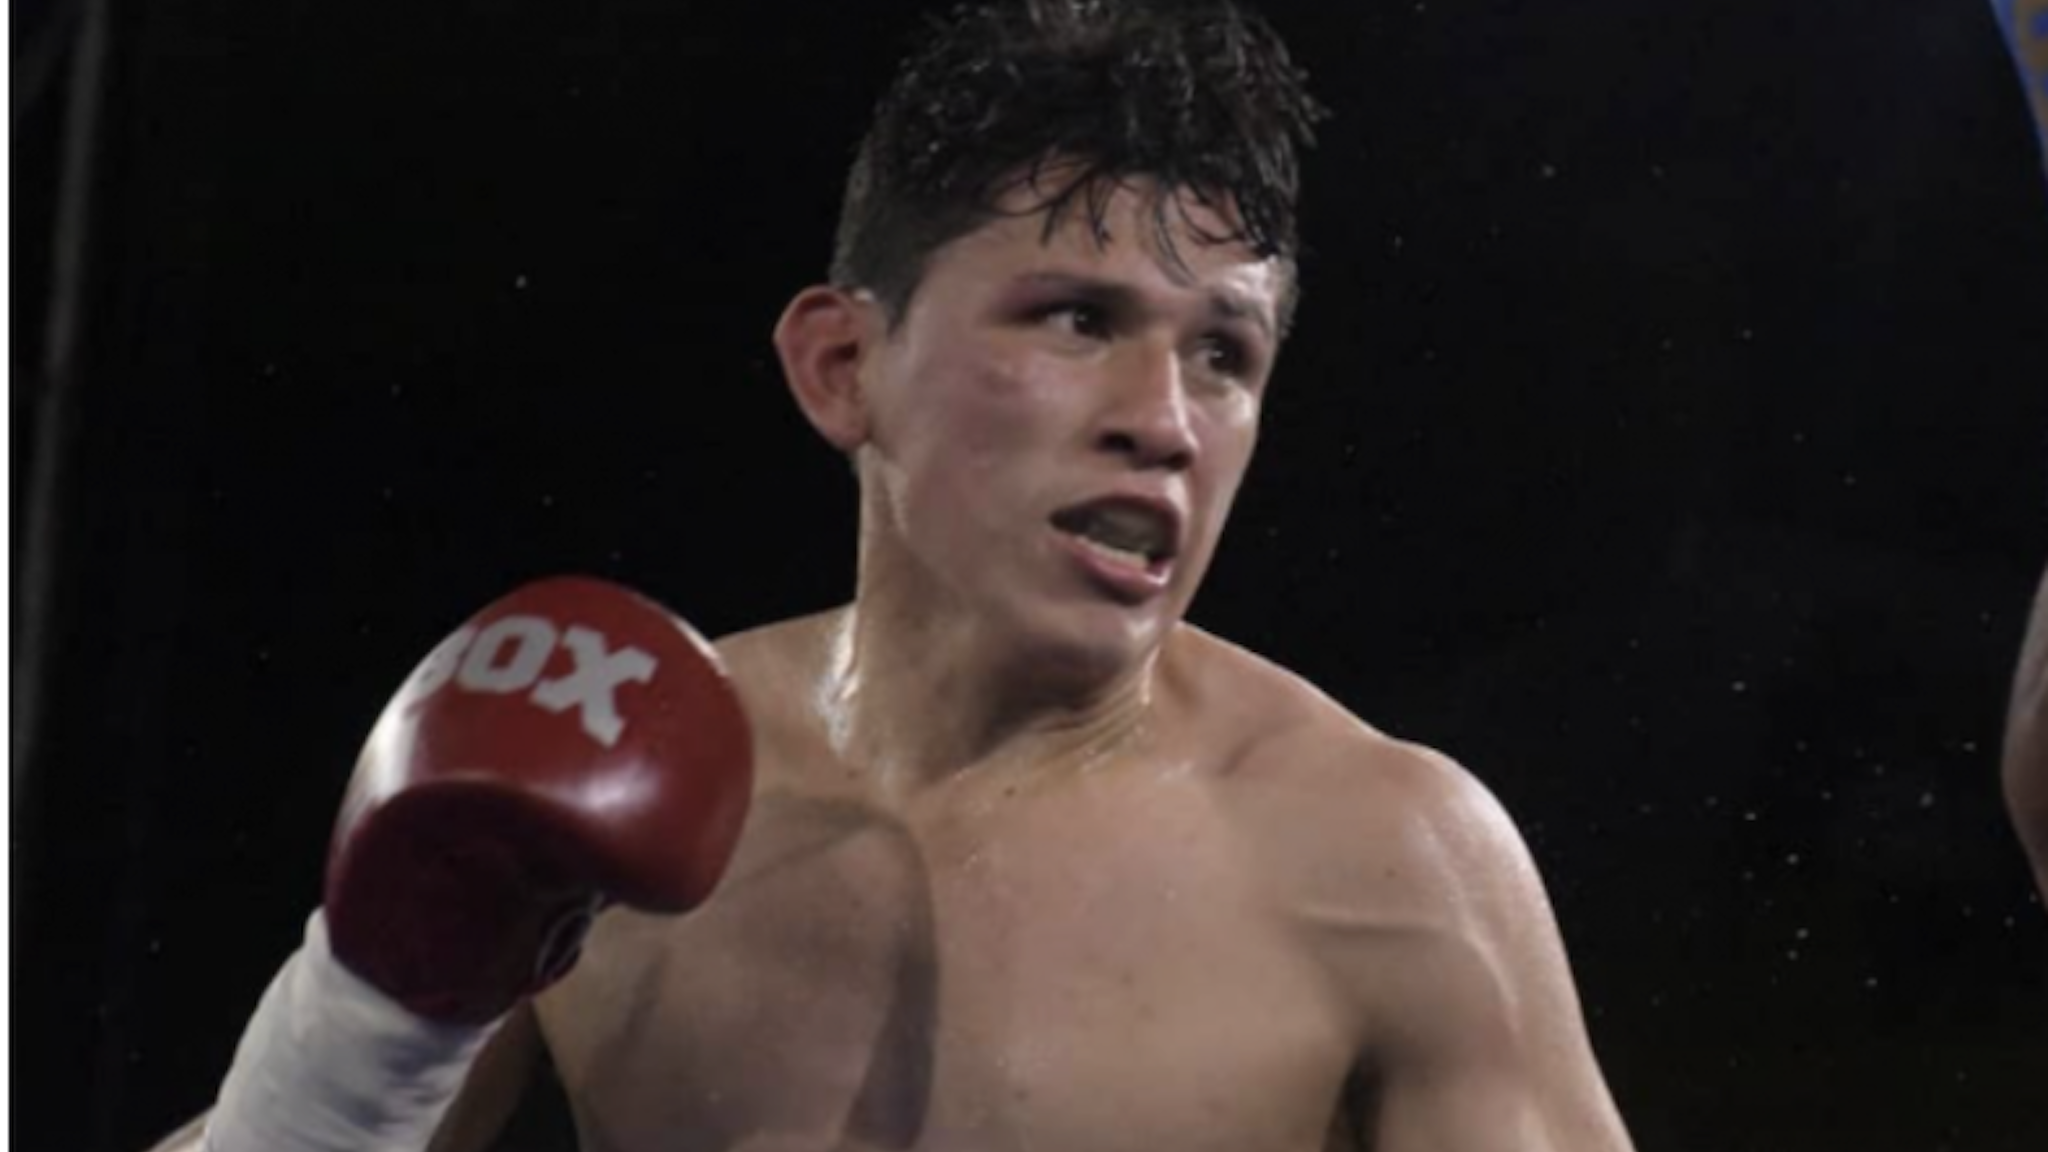 Boxer Luis Quinones, who was an undefeated junior welterweight before he was knocked out Saturday night in a Colombia bout against a pal and sparring partner, has died of his injuries.